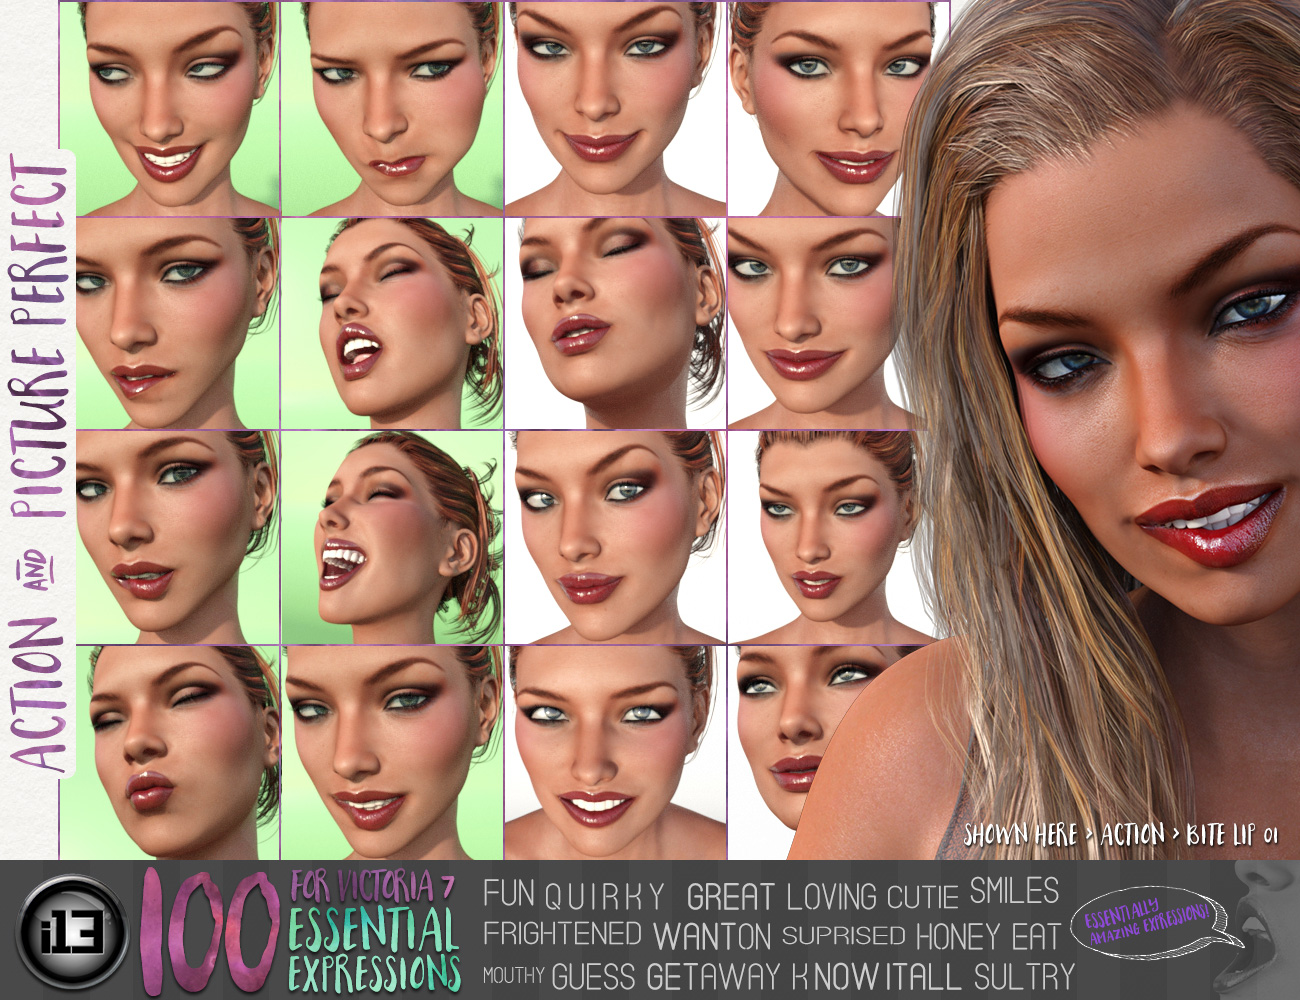 i13 100 Essential Expressions for Victoria 7 by: ironman13, 3D Models by Daz 3D